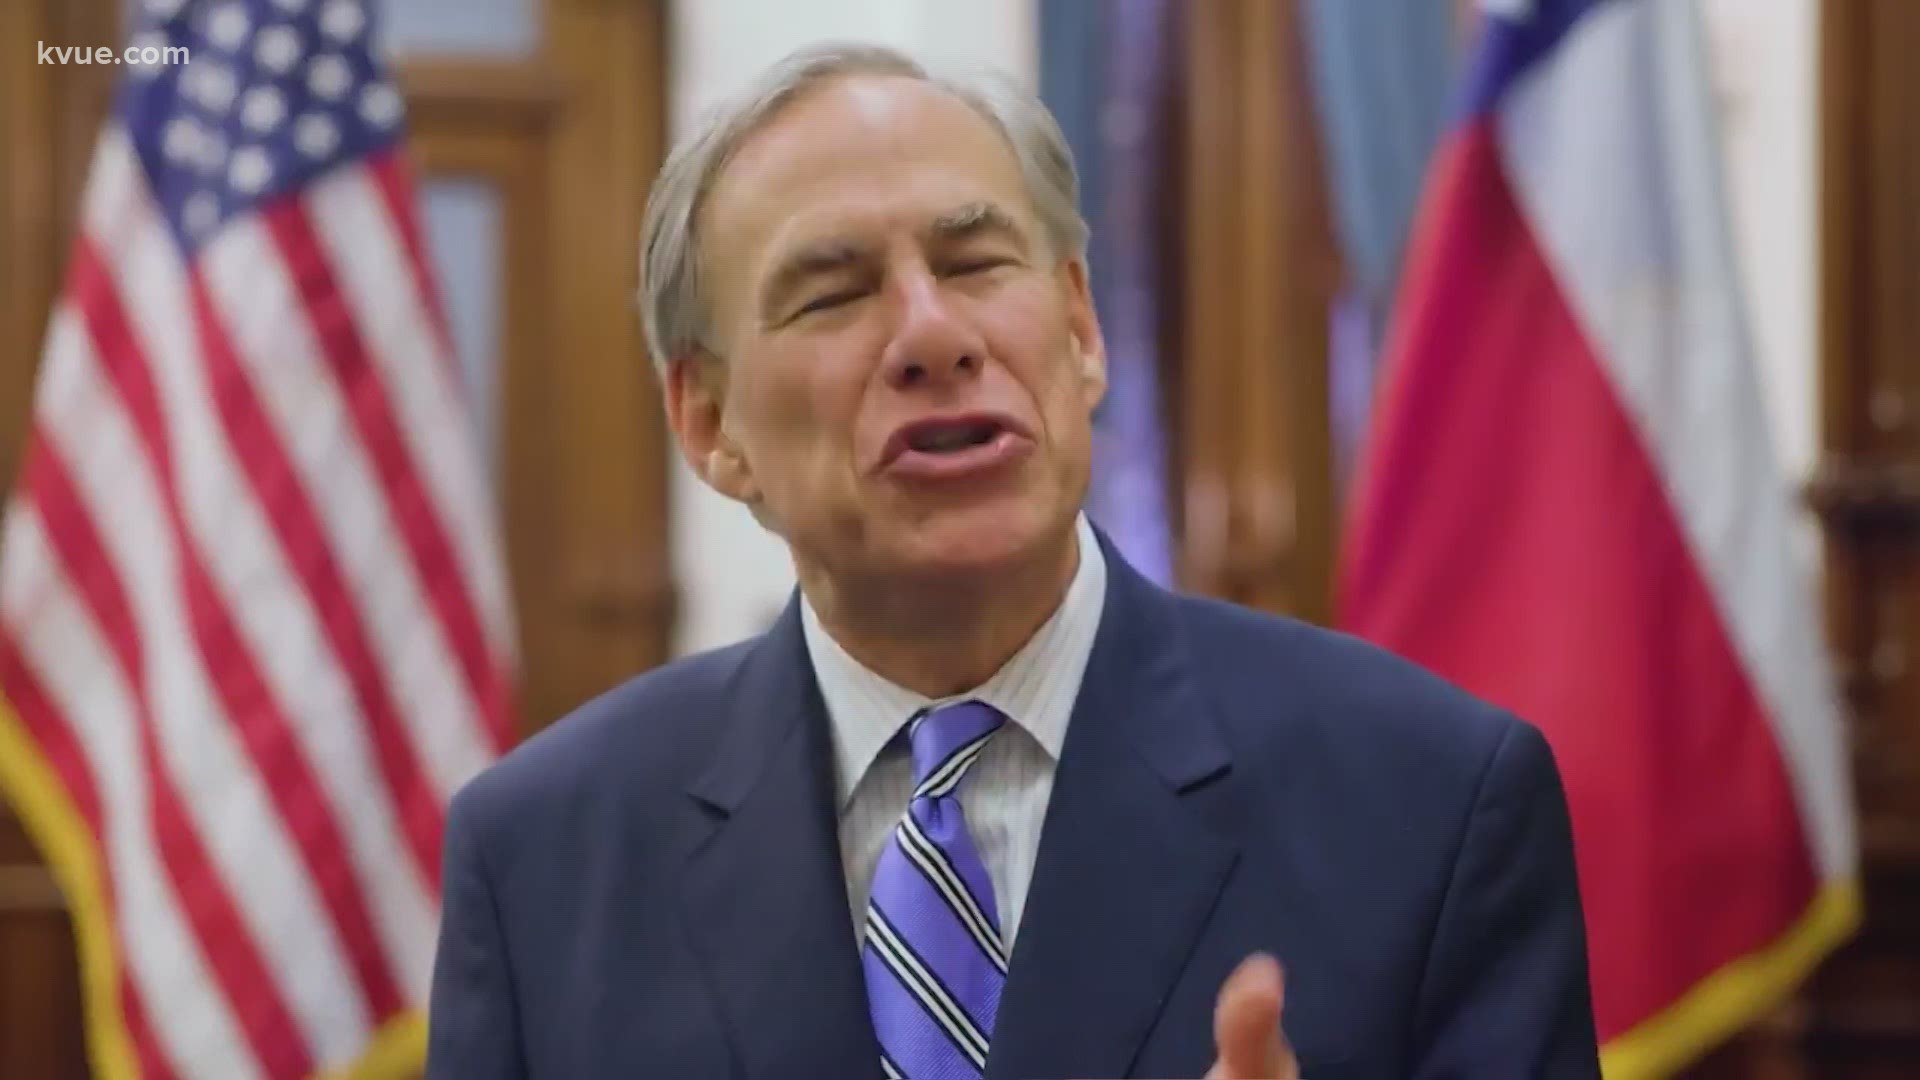 Gov. Greg Abbott has been encouraging Texans to get COVID-19 vaccines if they choose.